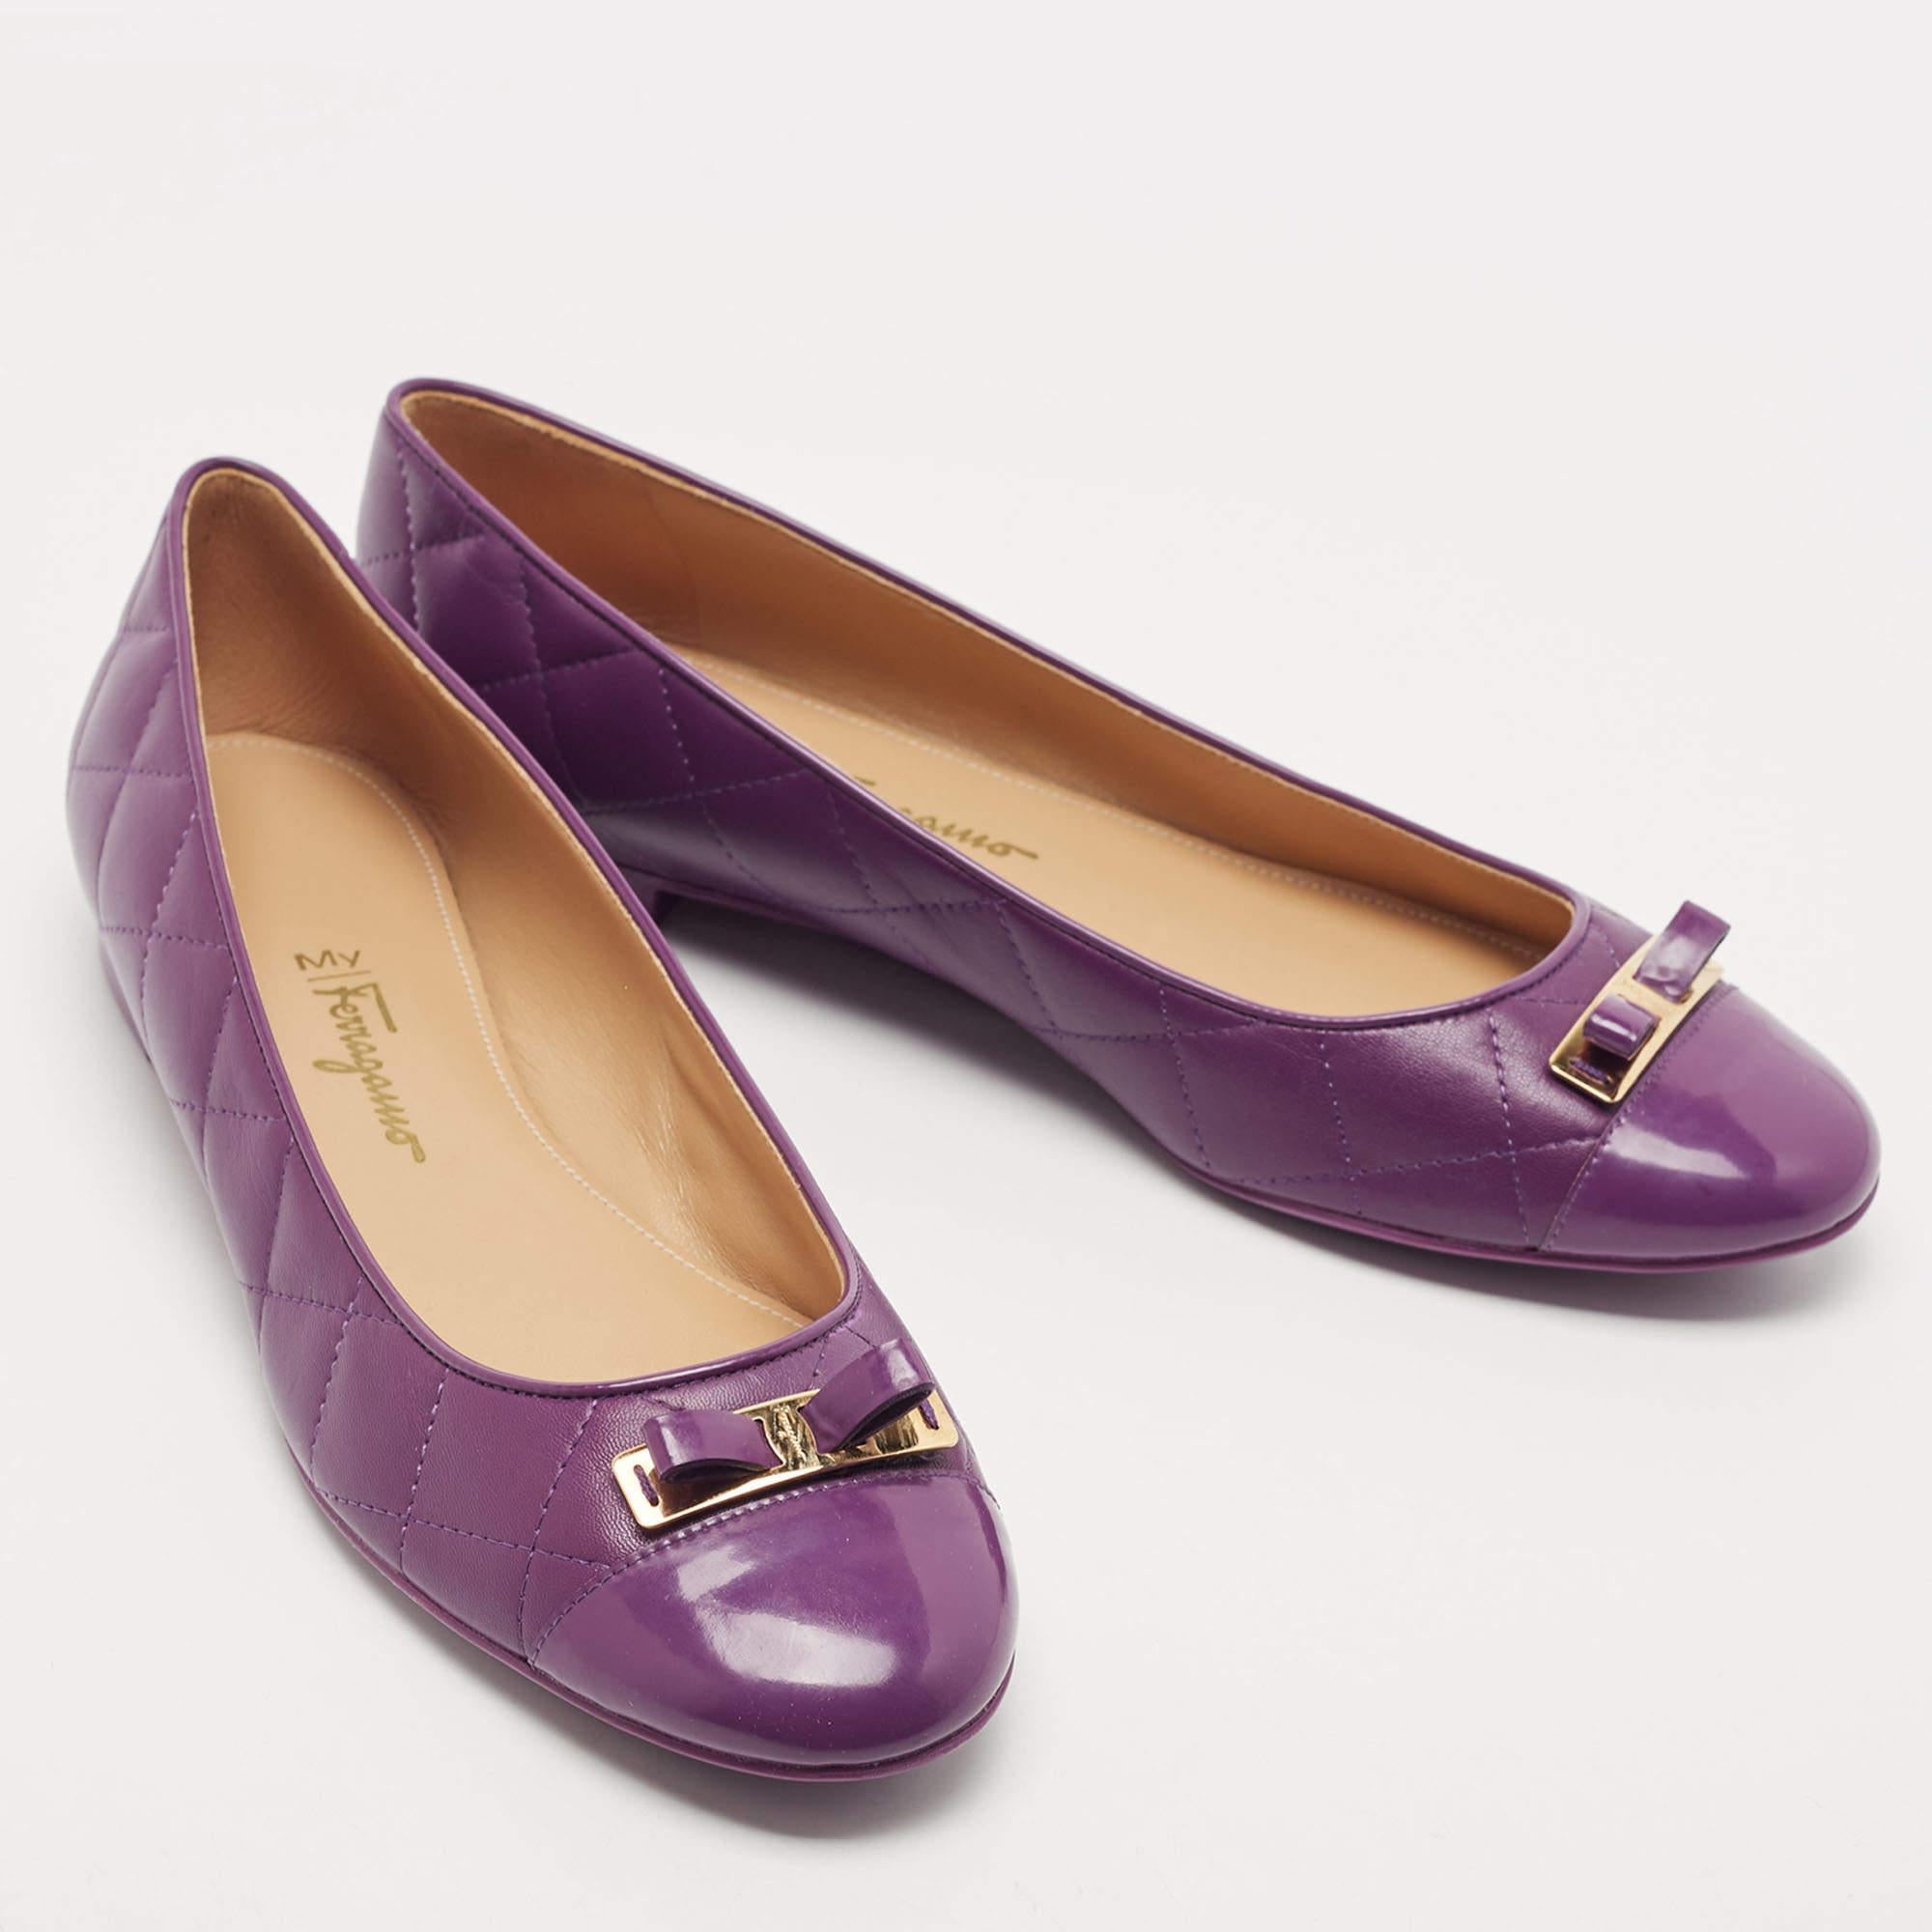 Defined by comfort and effortless style, no wardrobe is ever complete without a pair of chic ballet flats. This pair is lovely to look at and is equipped with elements like a comfortable insole and a durable sole.


Includes
Original Dustbag,